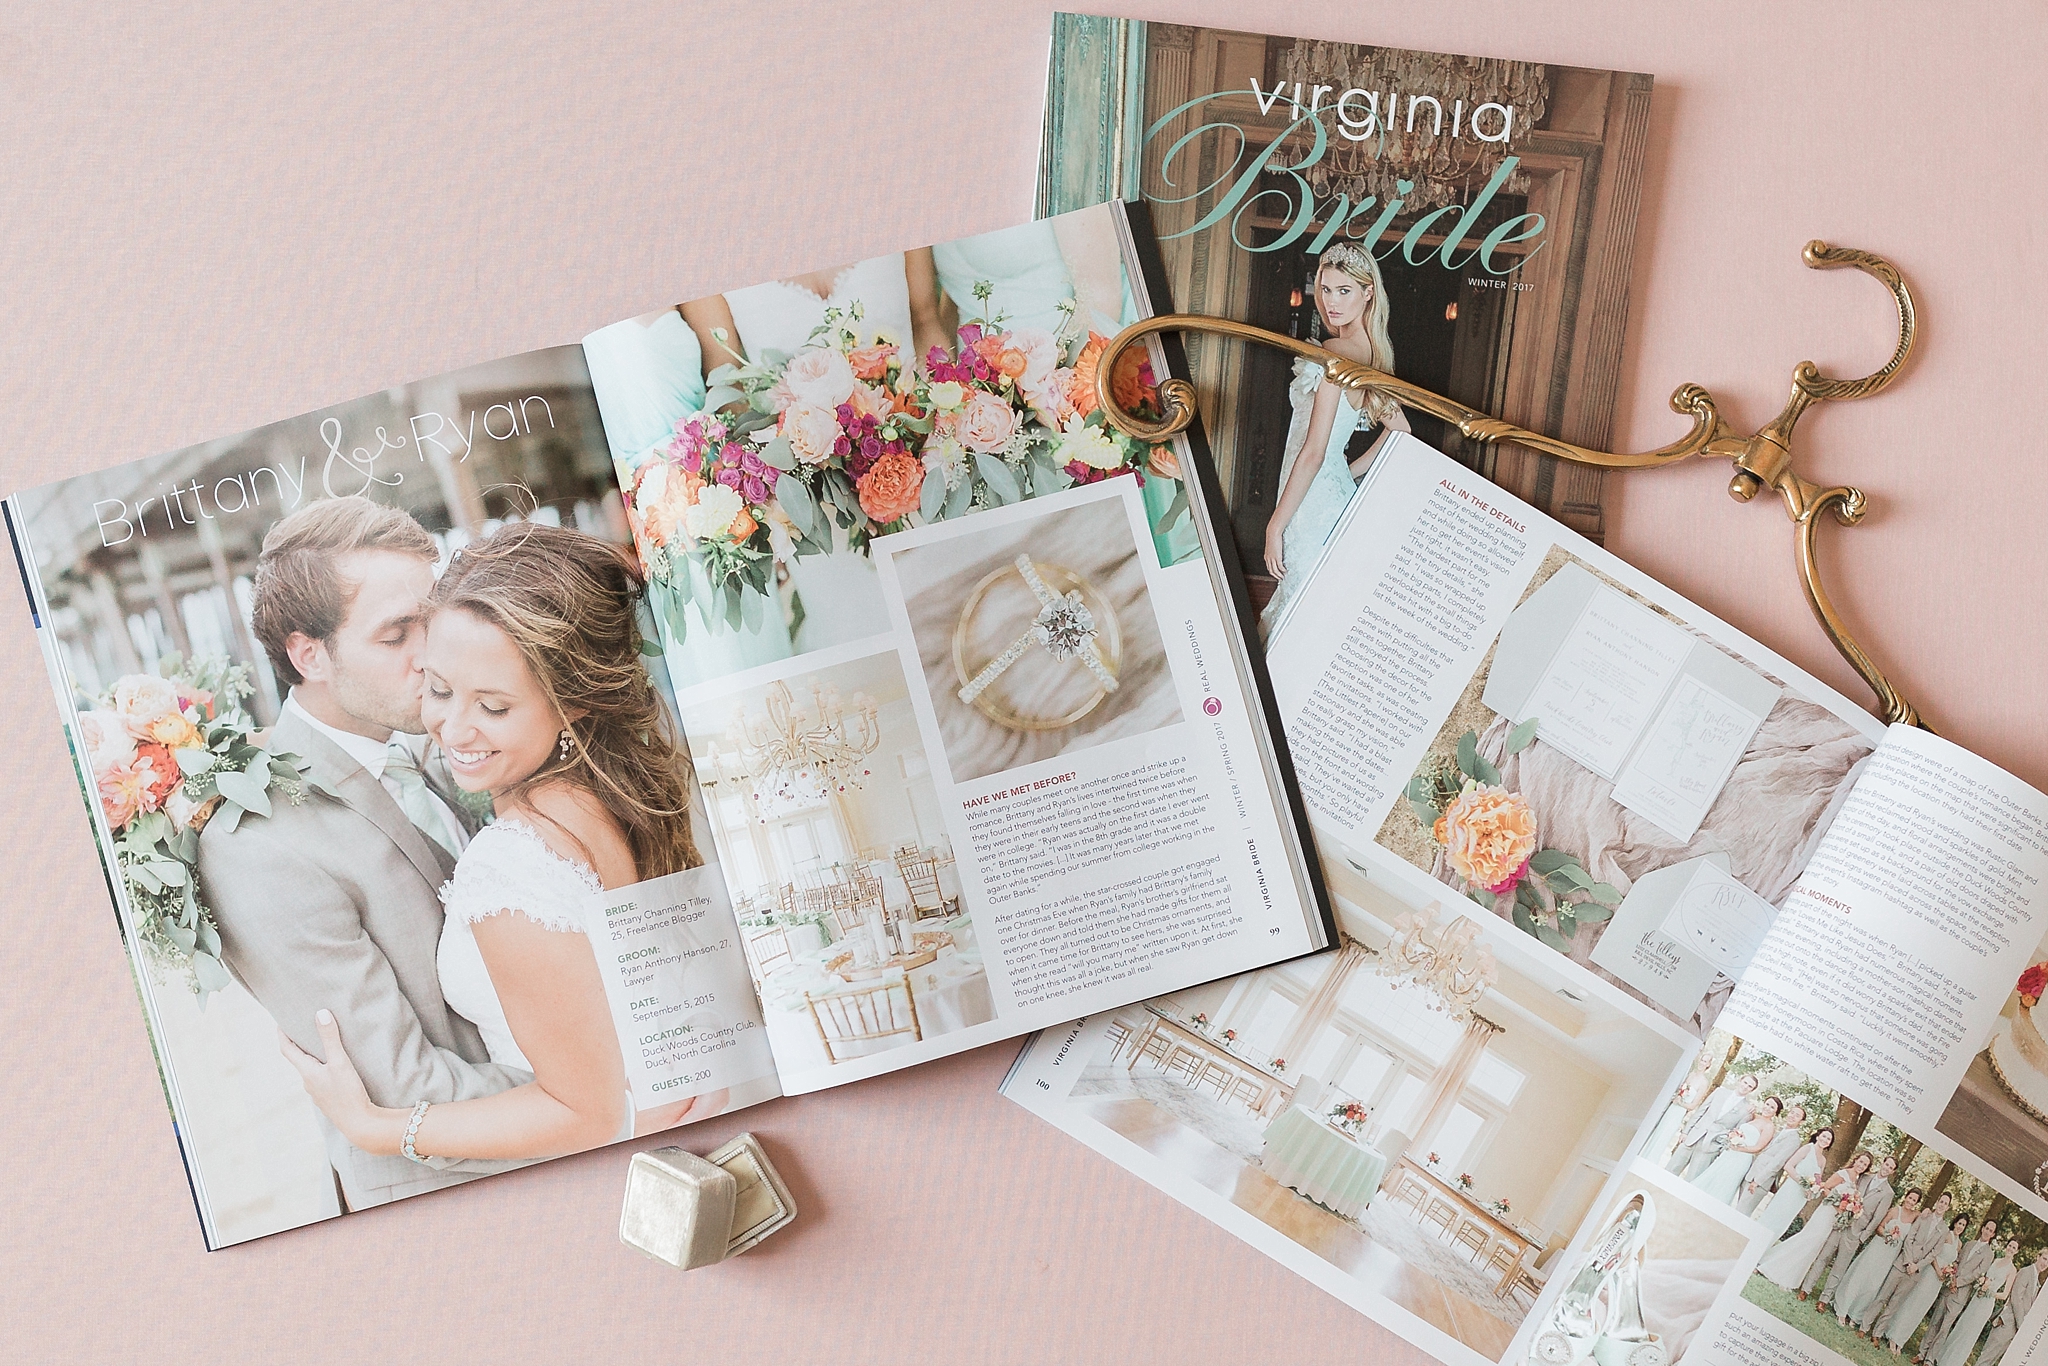 A colorful Outer Banks wedding photographed at Ducks Woods Country Club is featured in the prestigious Virginia Bride Magazine.